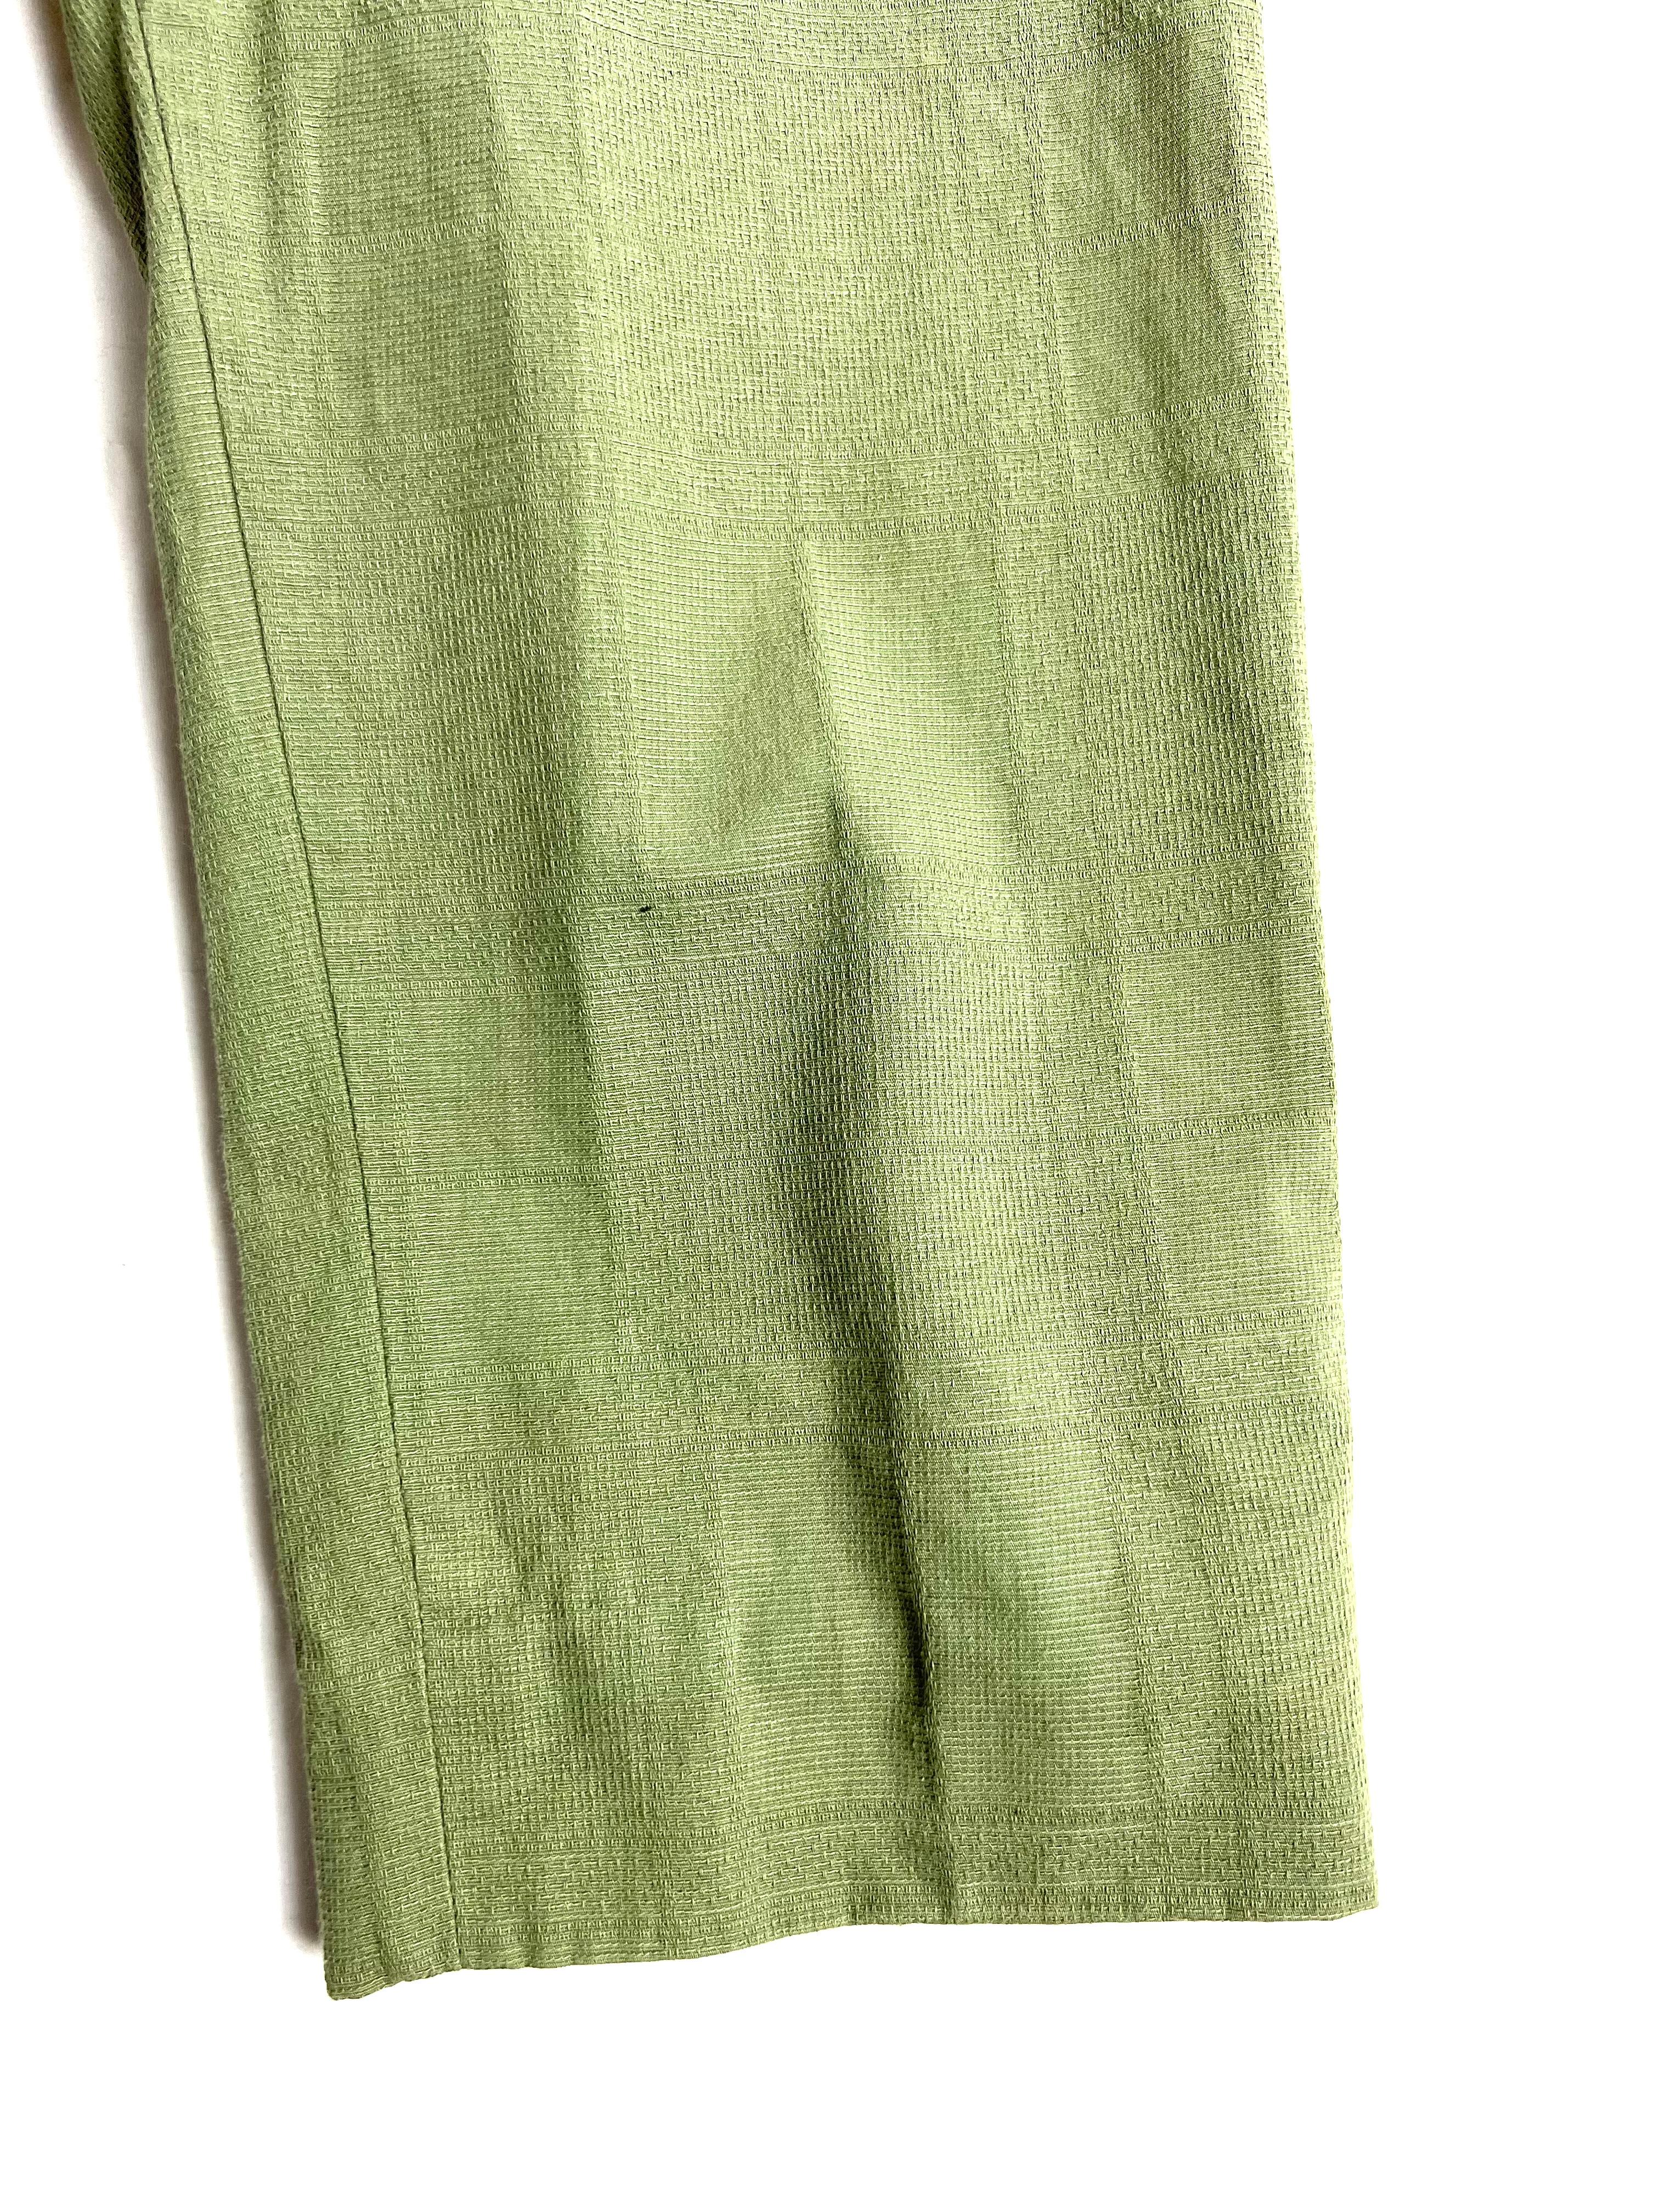 Marni Green Capri Pants, Size 40

- Mid raise
- Side pockets
- Front button and zip closure
- Below the knees length
- Checkered pattern
- 100% Cotton